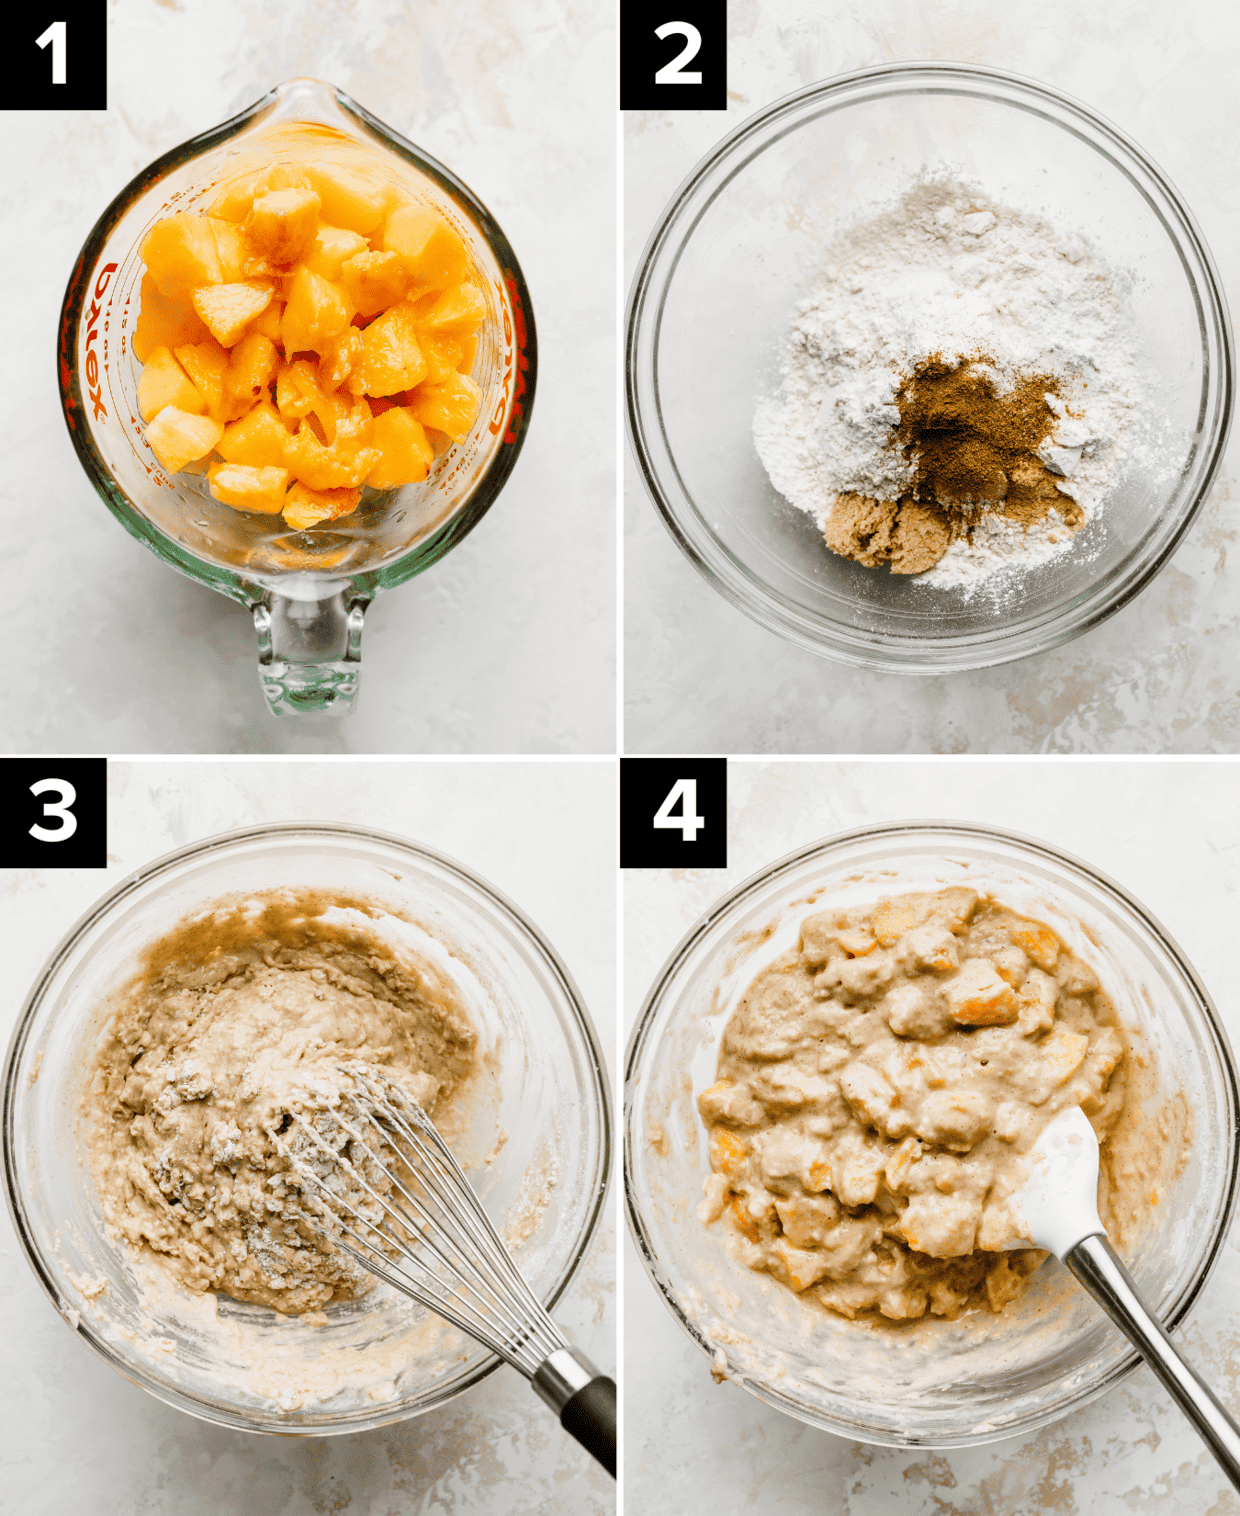 Four images showing how to make Peach Fritters batter in a glass bowl on a white background.